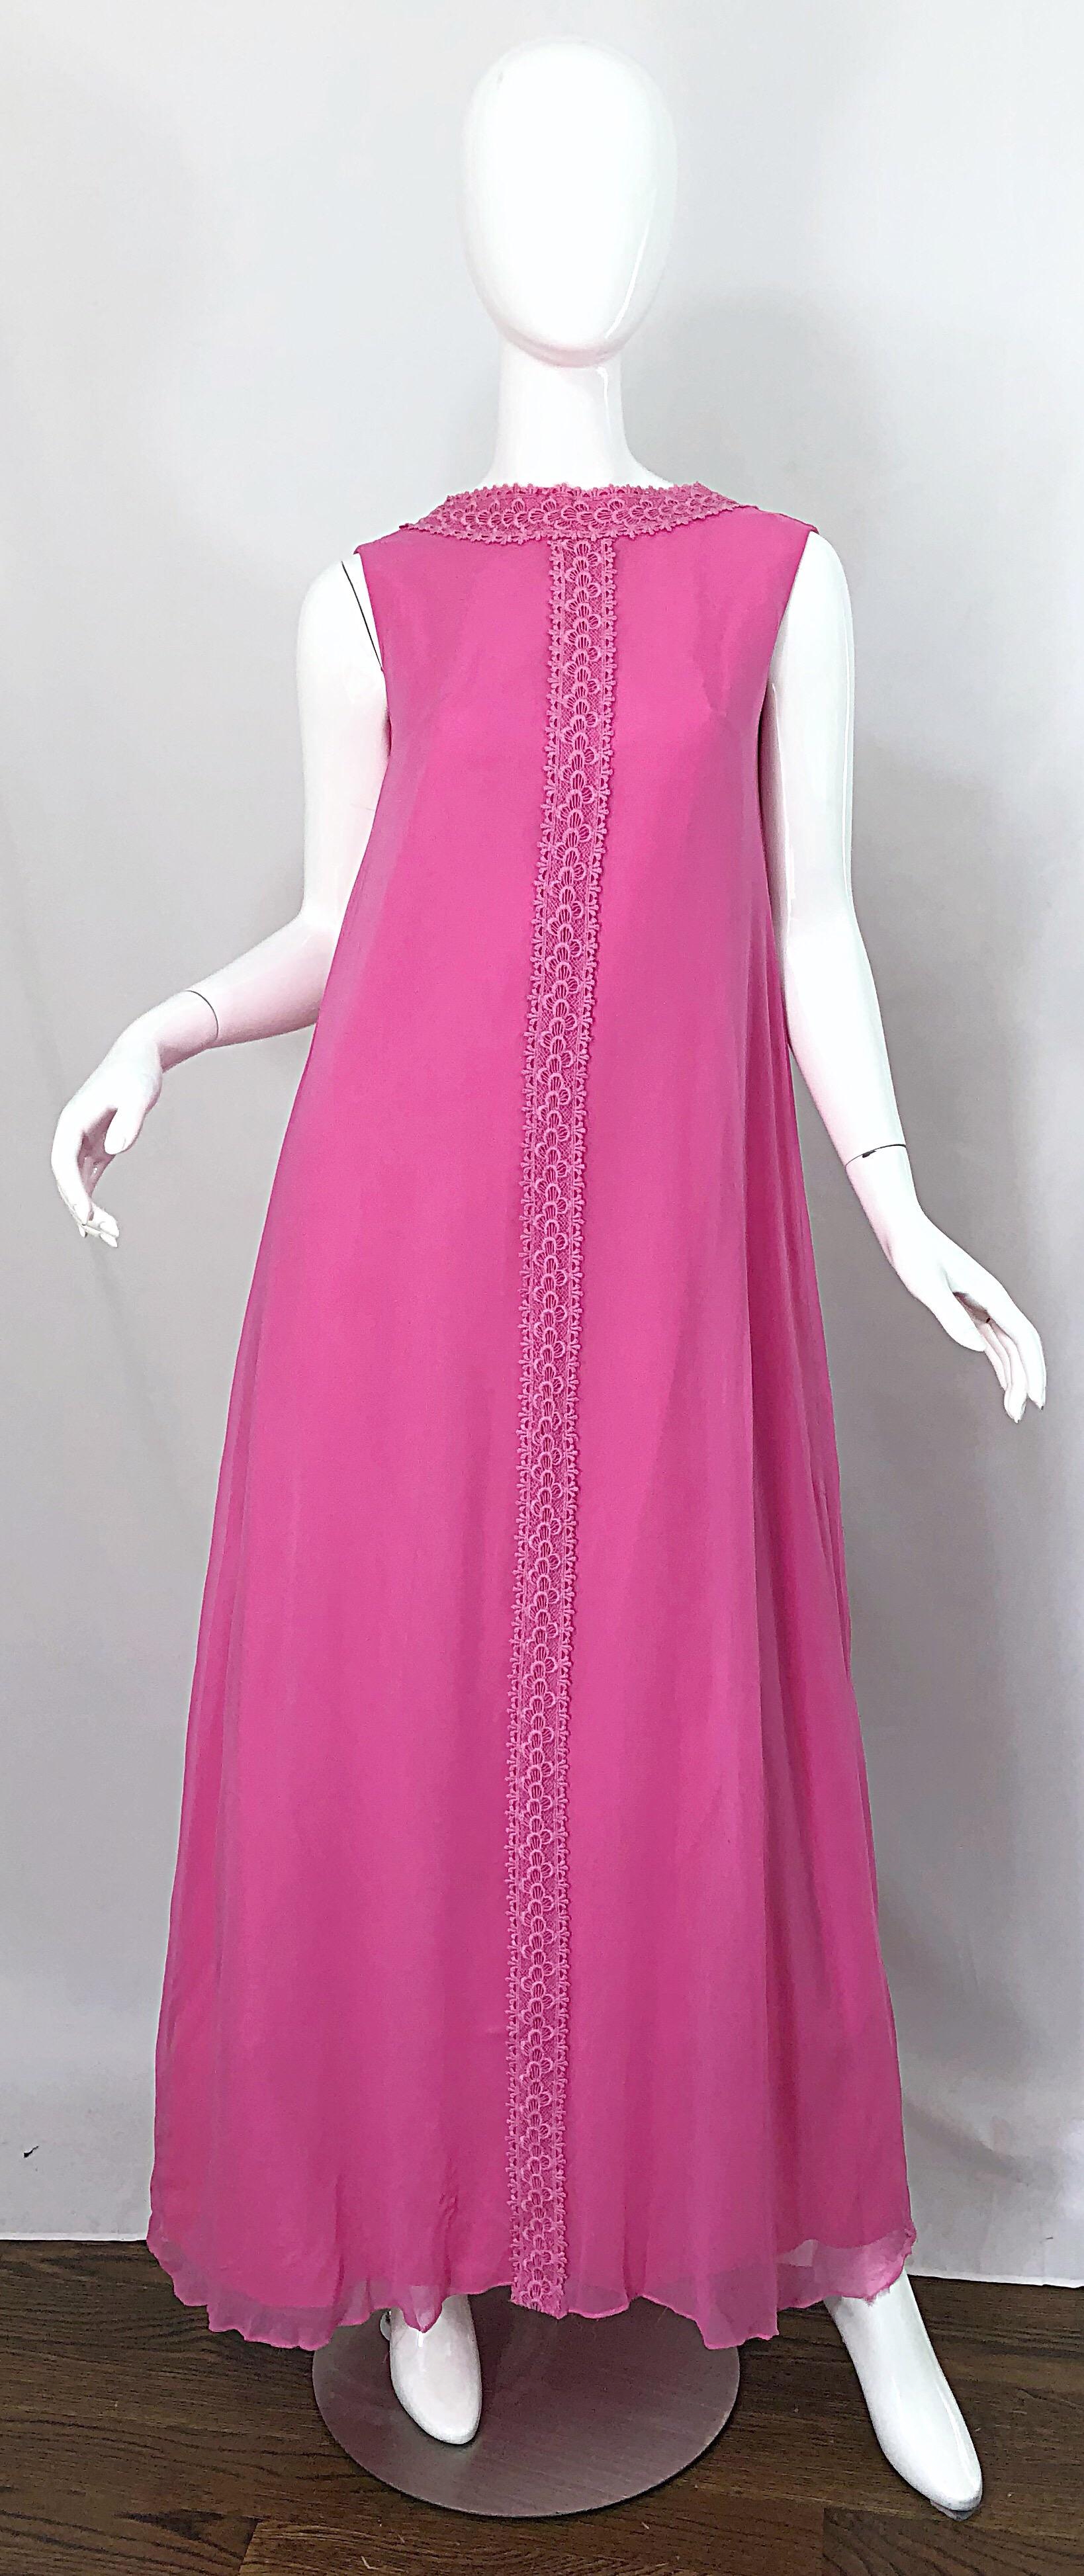 Chic 1960s demi couture bubblegum pink silk chiffon high neck gown! Features hand embroidery up the center front, collar, and back neck. Low cut back features a bow with full metal zipper up the back and hook-and-eye closure. Hidden snaps on the bow